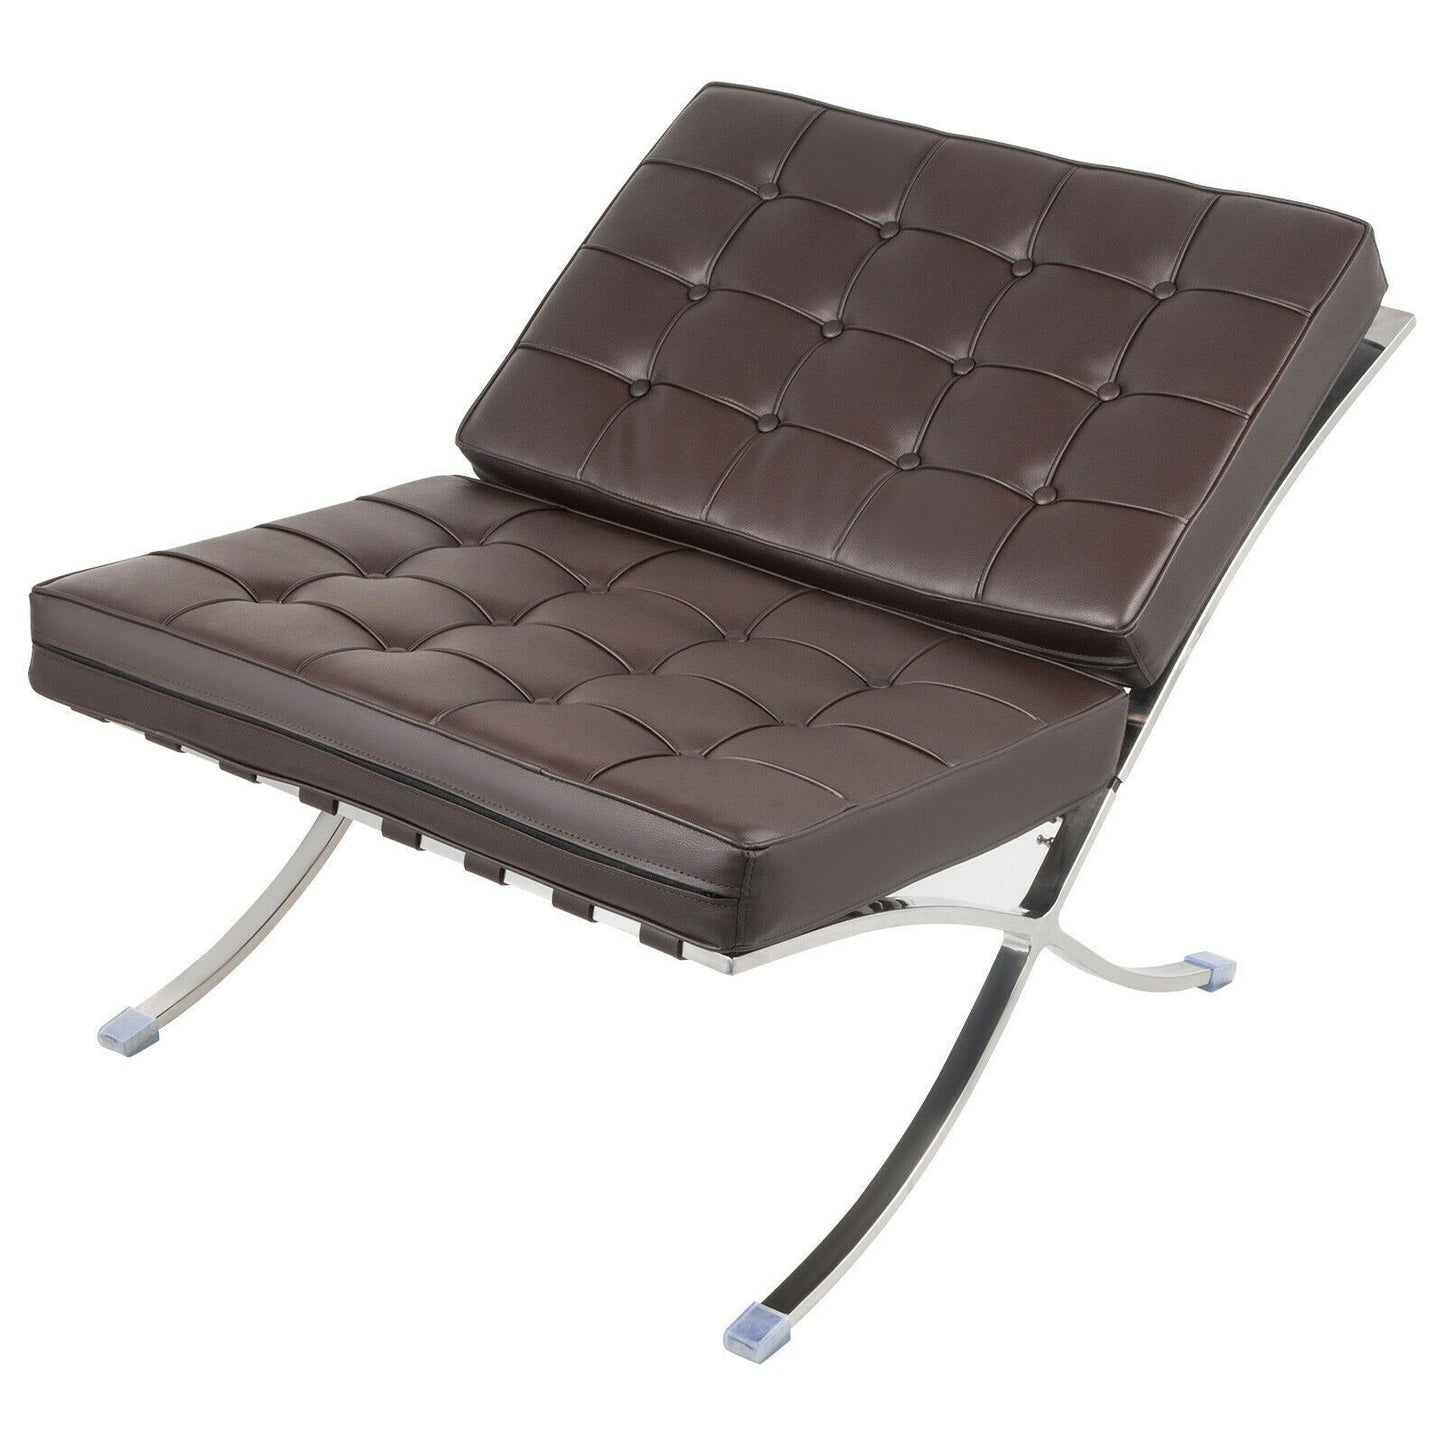 Luxurious Brown Leather Chaise Lounge Chair - Westfield Retailers